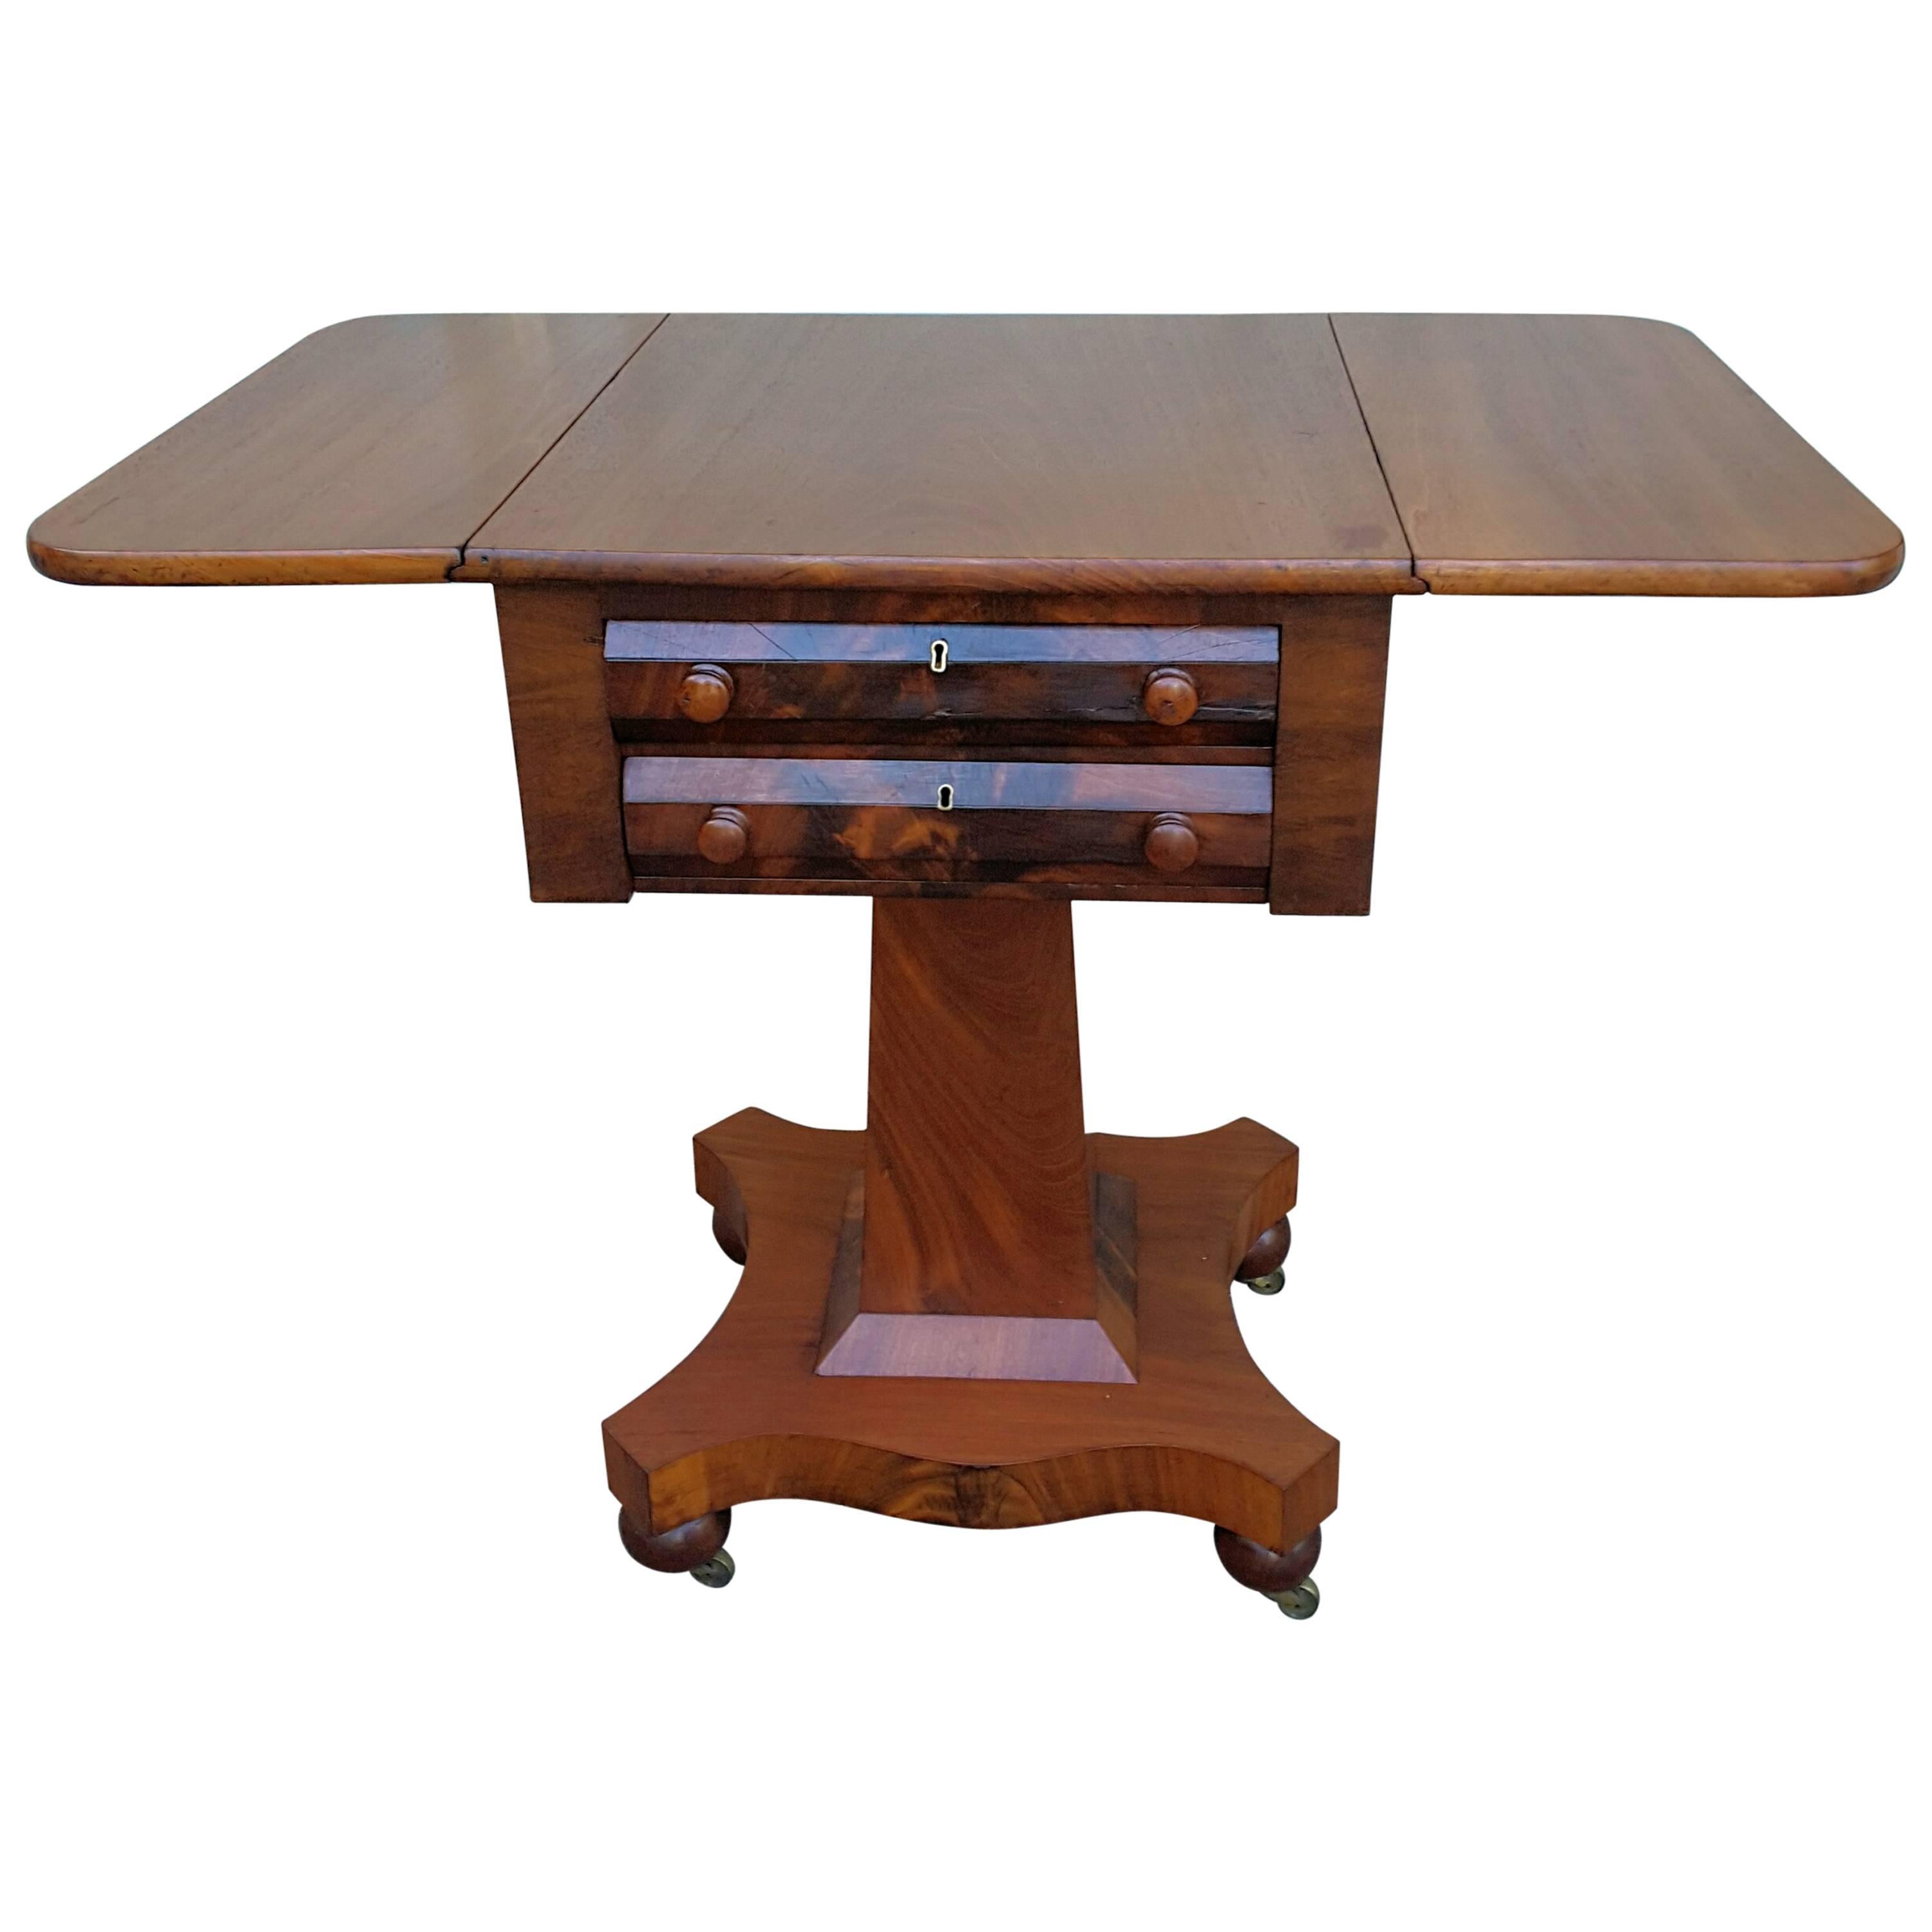 Neoclassical American Empire Drop-Leaf Side Table in Mahogany, circa 1830-1840 For Sale